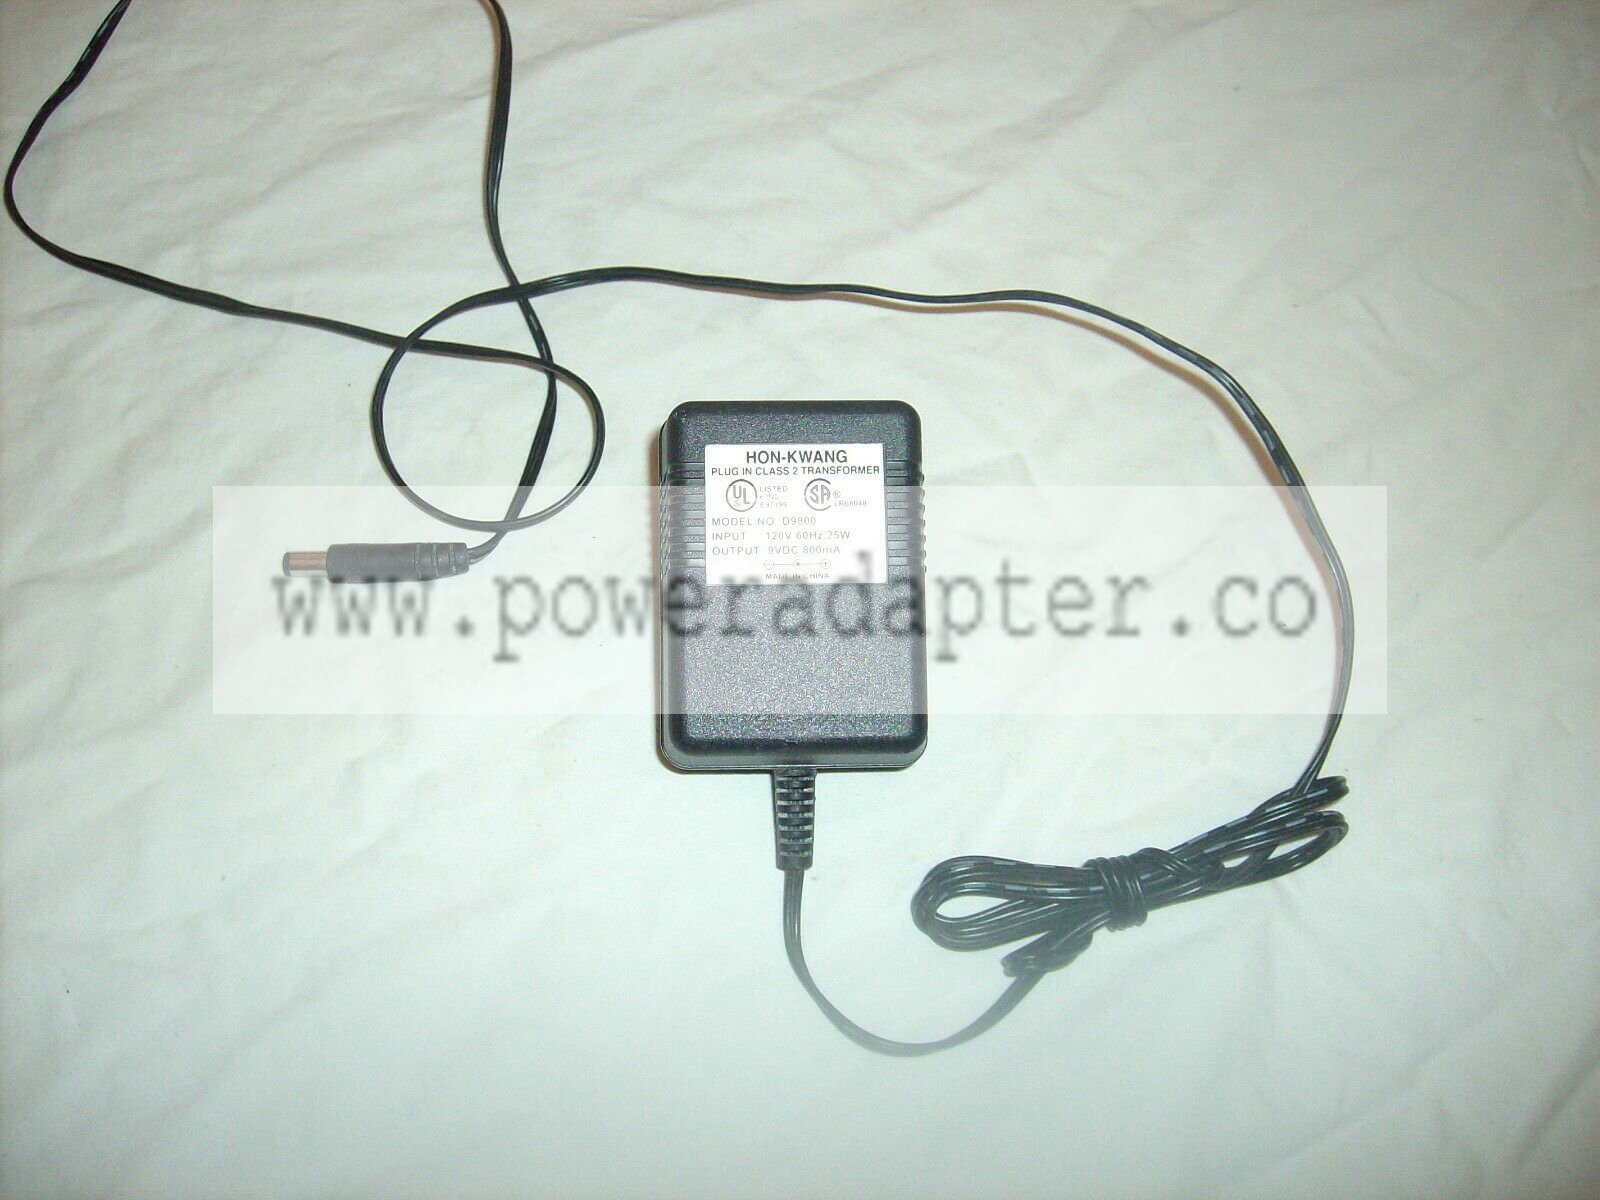 Hon Kwang D9800 Power Adapter MPN: D9800 Brand: Hon Kwang UPC: Does not apply The item appears to be in new cond